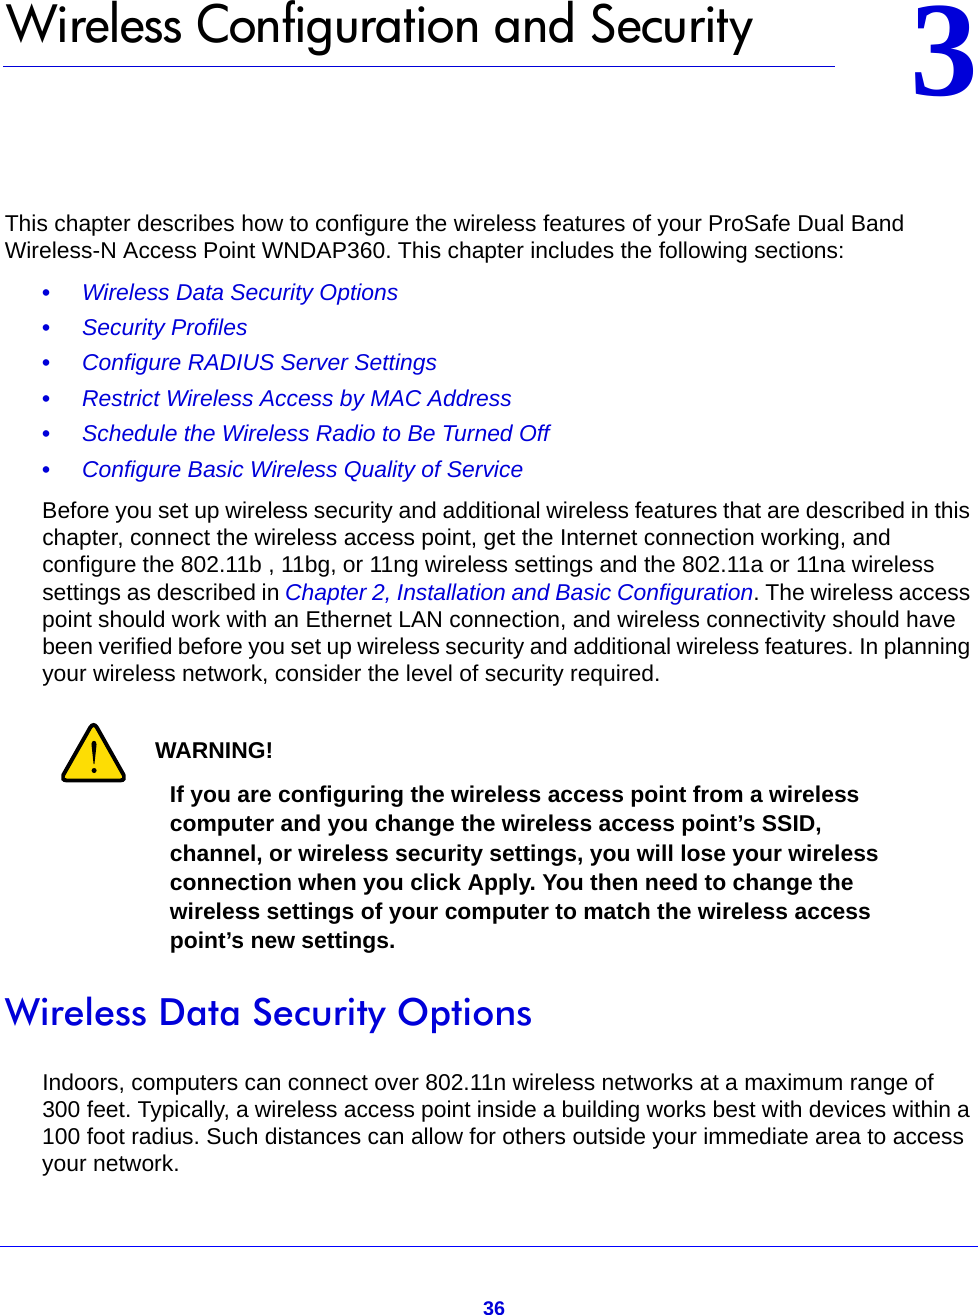 3633.   Wireless Configuration and SecurityThis chapter describes how to configure the wireless features of your ProSafe Dual Band Wireless-N Access Point WNDAP360. This chapter includes the following sections:•     Wireless Data Security Options •     Security Profiles •     Configure RADIUS Server Settings •     Restrict Wireless Access by MAC Address •     Schedule the Wireless Radio to Be Turned Off •     Configure Basic Wireless Quality of Service Before you set up wireless security and additional wireless features that are described in this chapter, connect the wireless access point, get the Internet connection working, and configure the 802.11b , 11bg, or 11ng wireless settings and the 802.11a or 11na wireless settings as described in Chapter 2, Installation and Basic Configuration. The wireless access point should work with an Ethernet LAN connection, and wireless connectivity should have been verified before you set up wireless security and additional wireless features. In planning your wireless network, consider the level of security required.WARNING!If you are configuring the wireless access point from a wireless computer and you change the wireless access point’s SSID, channel, or wireless security settings, you will lose your wireless connection when you click Apply. You then need to change the wireless settings of your computer to match the wireless access point’s new settings.Wireless Data Security OptionsIndoors, computers can connect over 802.11n wireless networks at a maximum range of 300 feet. Typically, a wireless access point inside a building works best with devices within a 100 foot radius. Such distances can allow for others outside your immediate area to access your network.